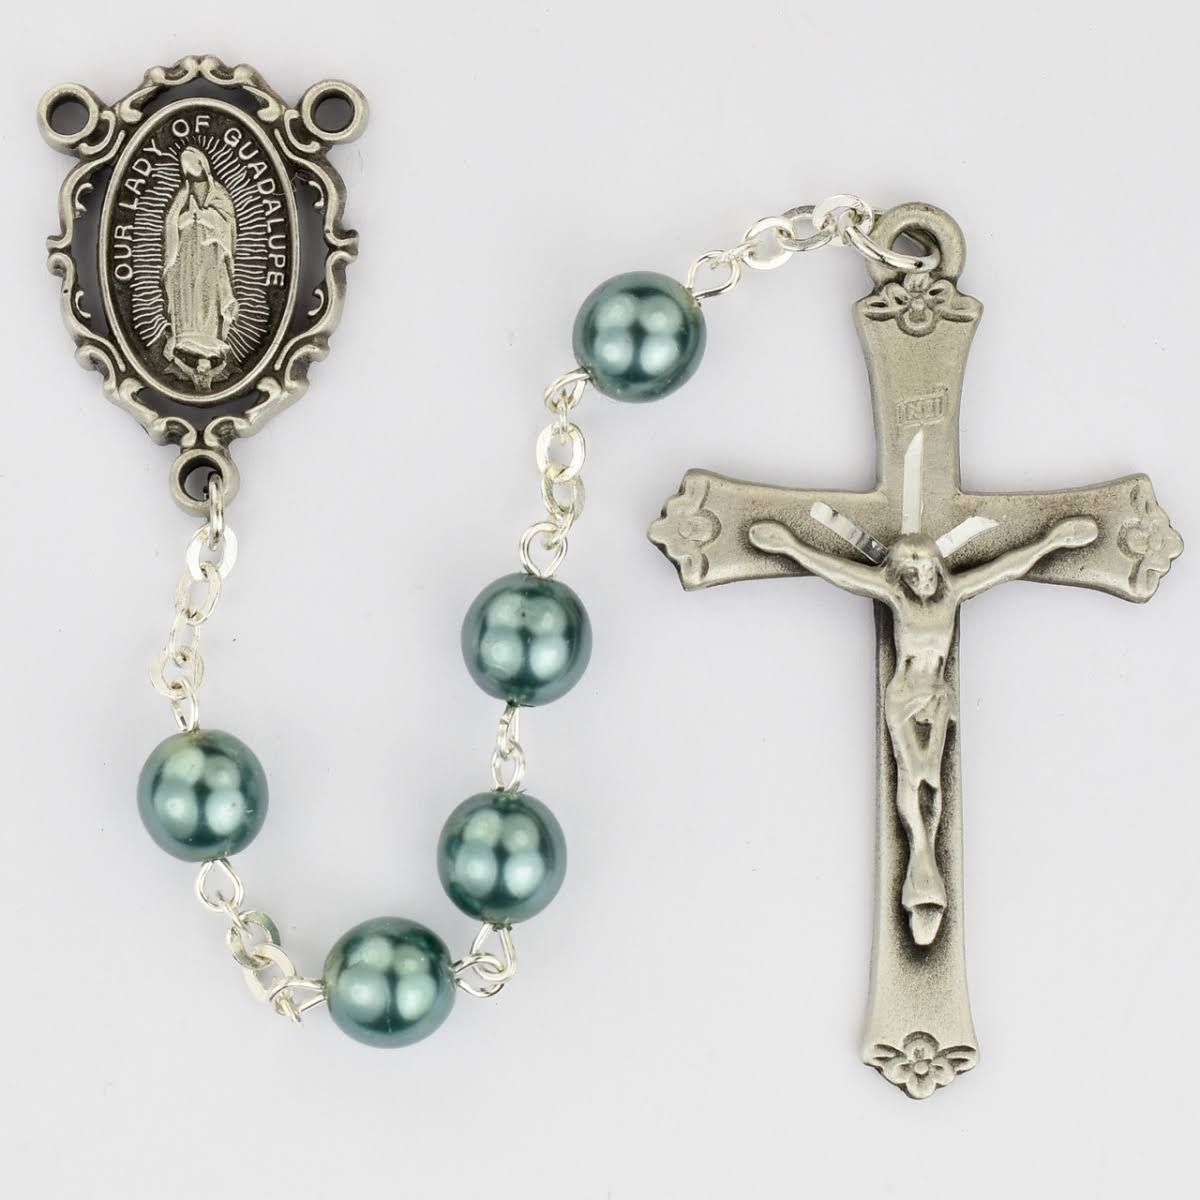 McVan R759F 7 mm Our Lady of Guadalupe Cross Rosary Set - Teal